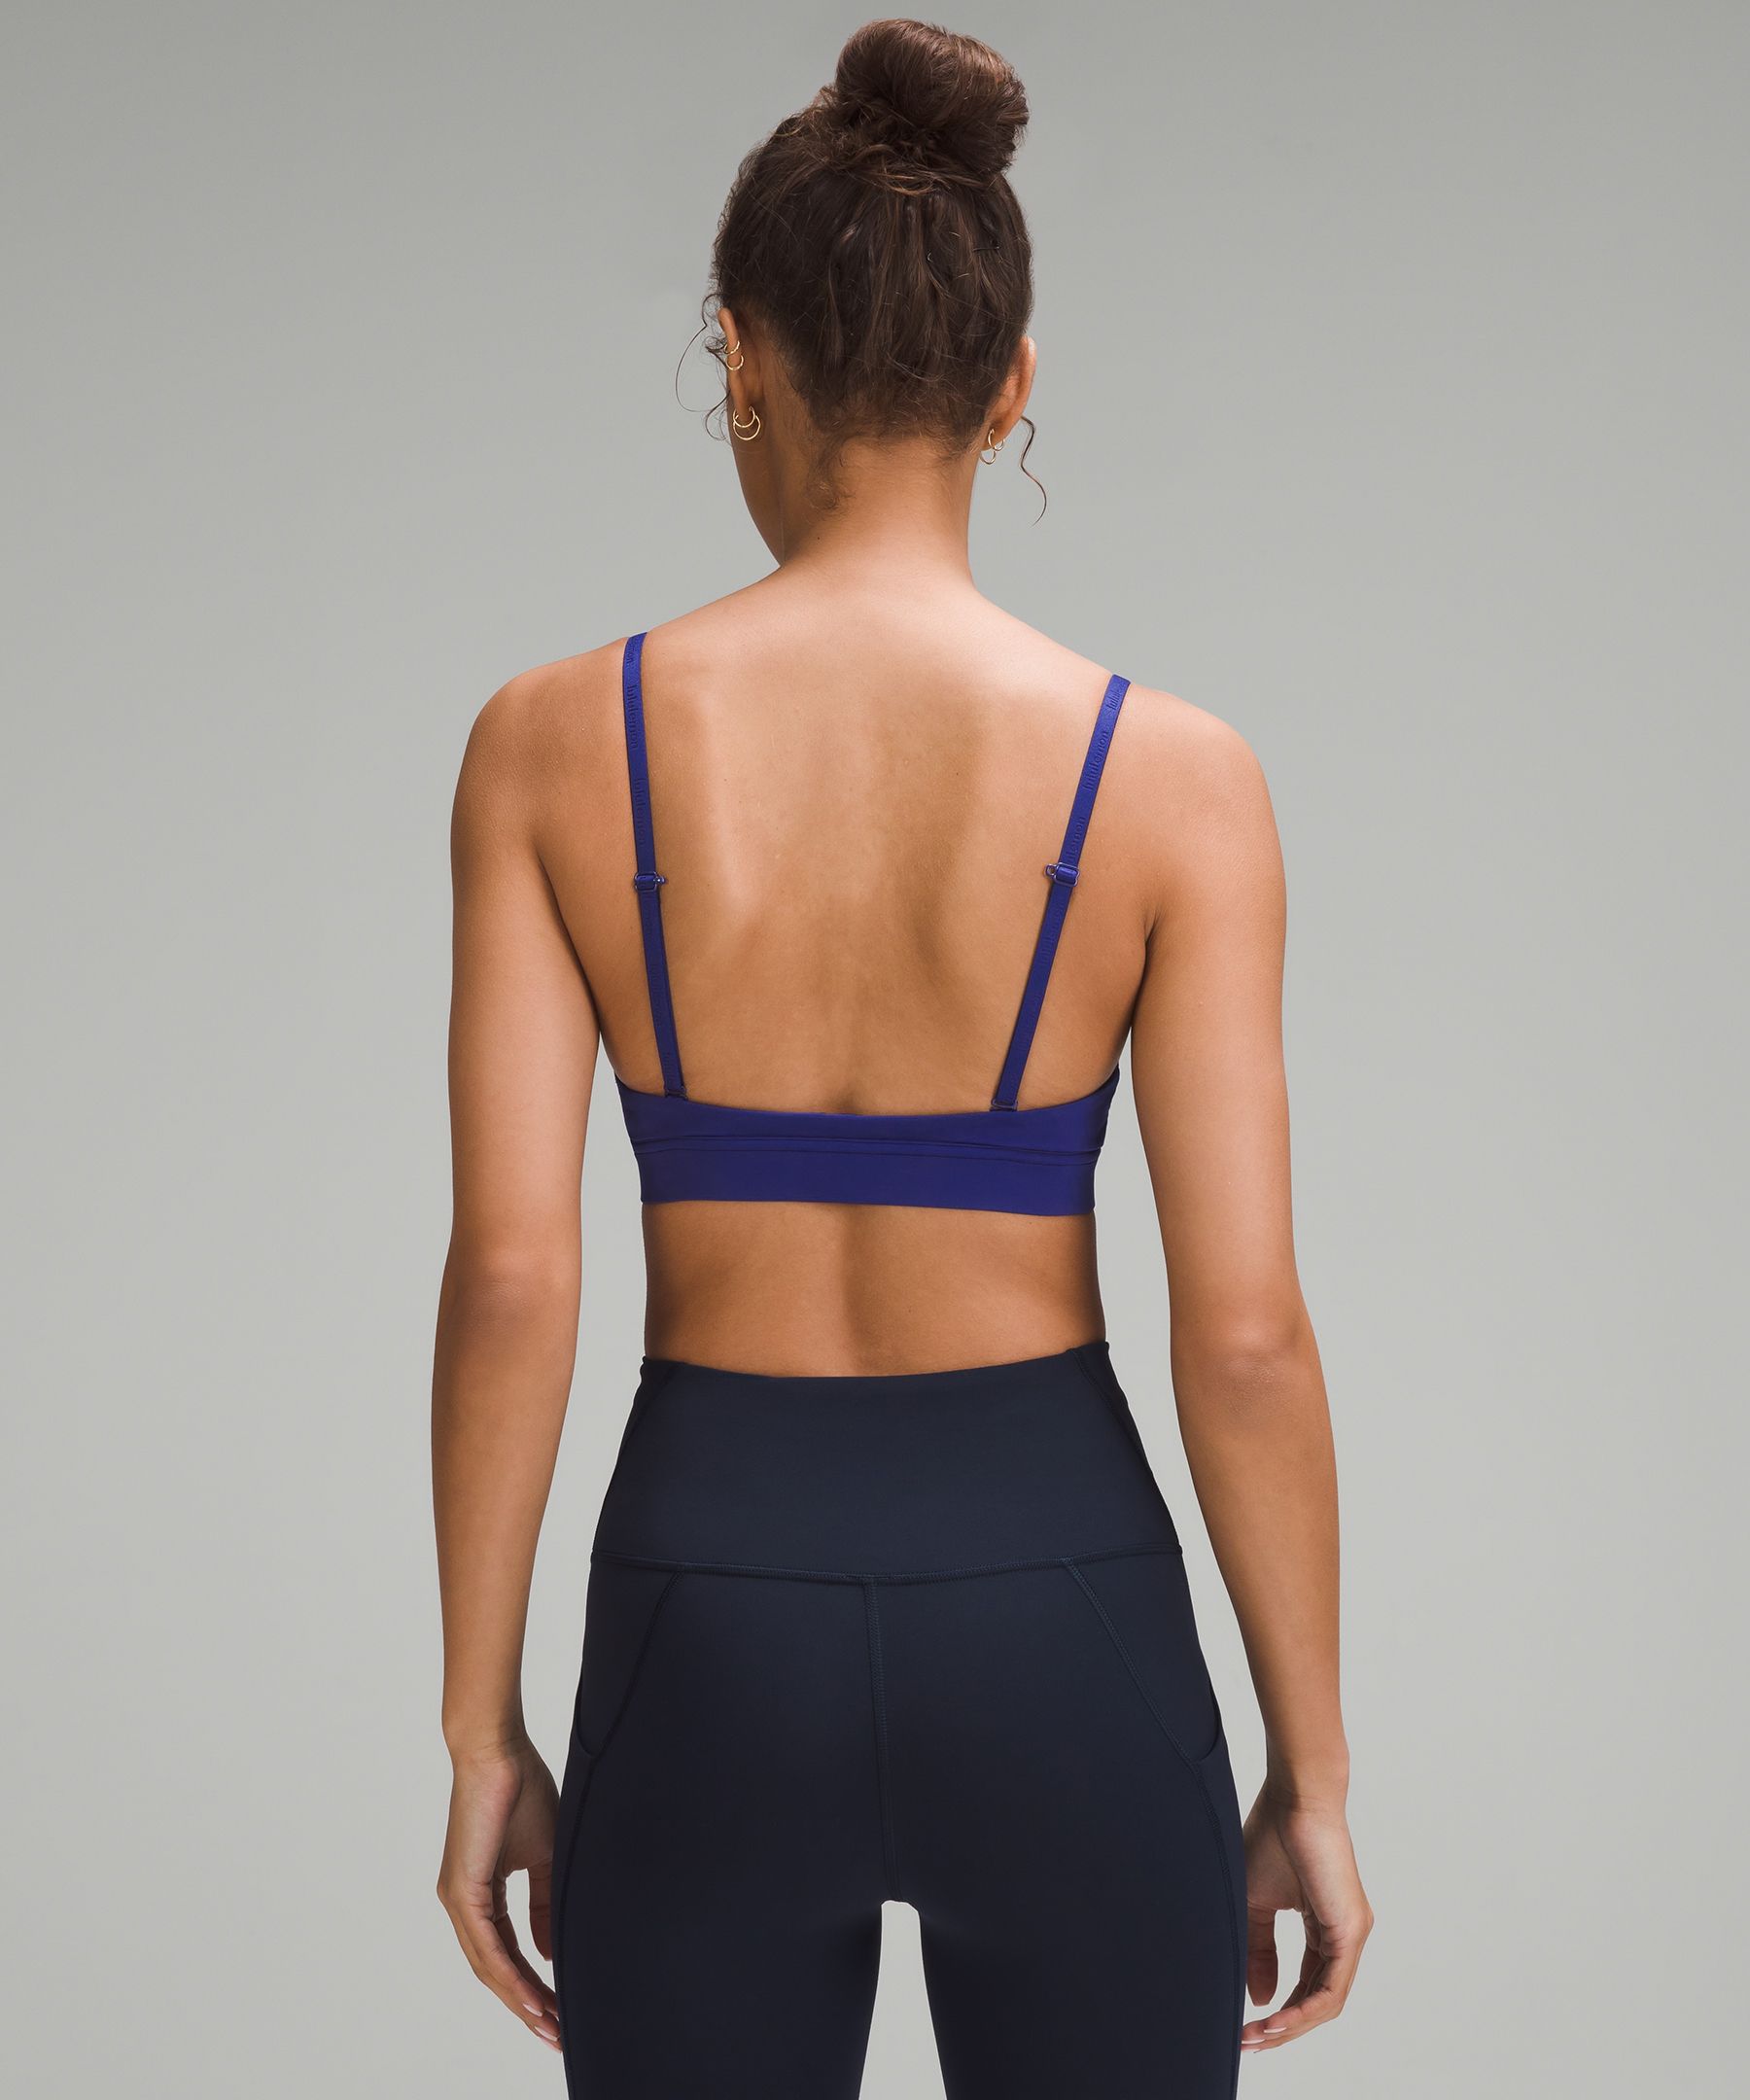 Lululemon License to Train Triangle Bra Light Support, A/B Cup